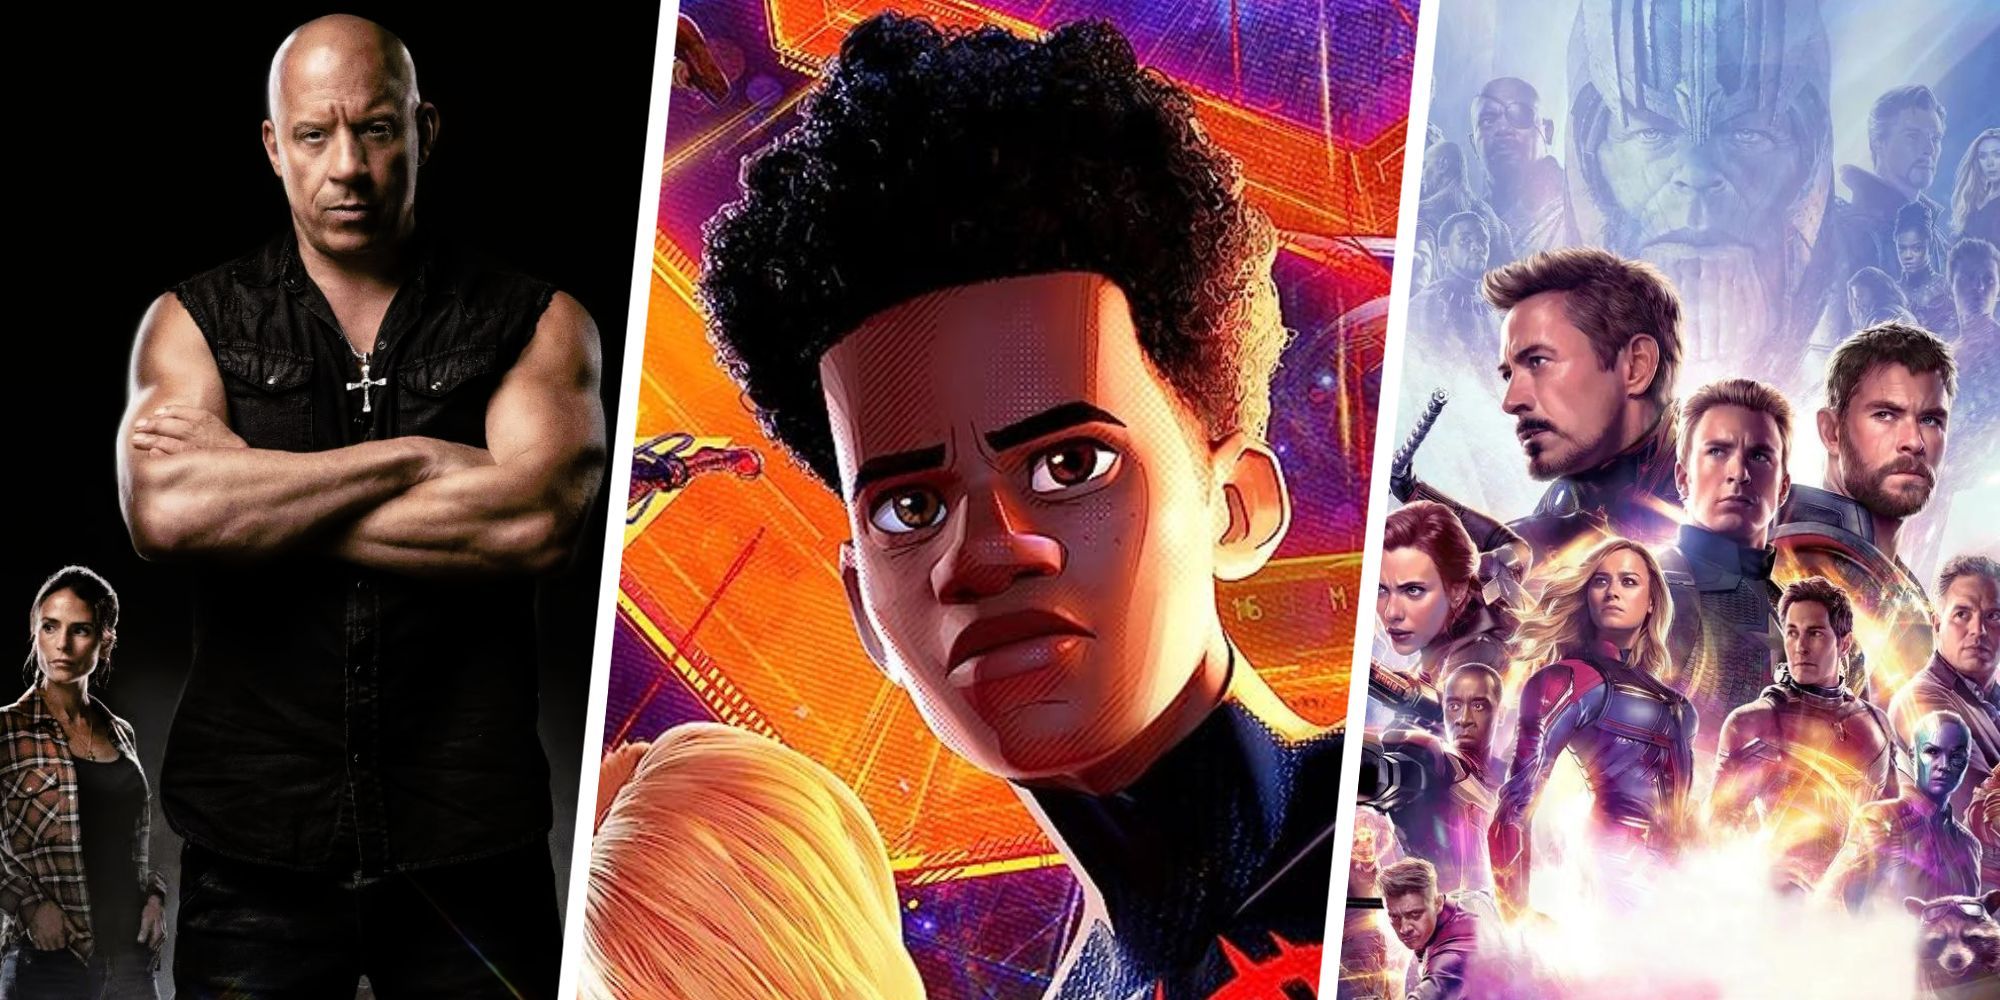 Collage with images from 'Fast X', 'Across the Spider-Verse', and 'Avengers Endgame'